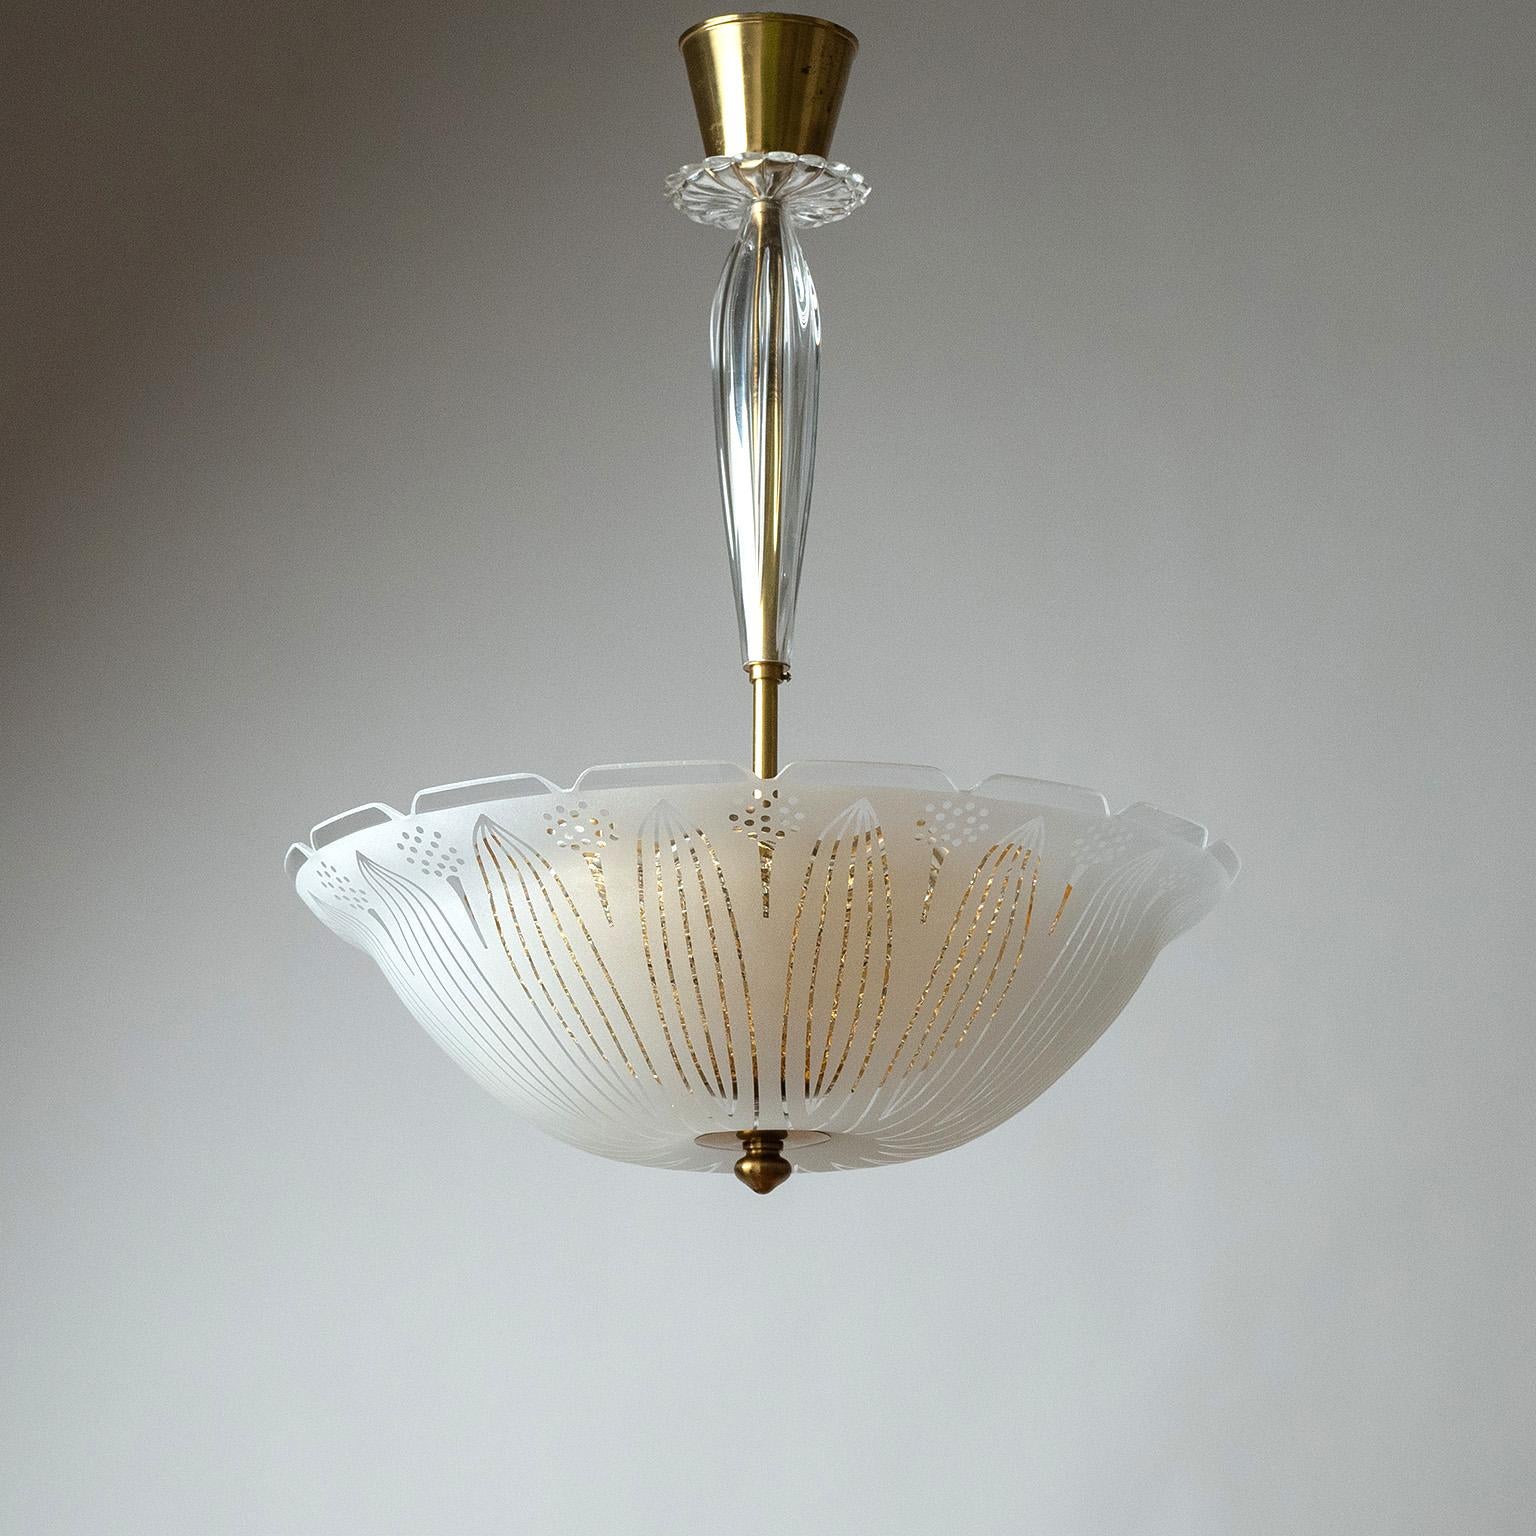 Charming Orrefors glass chandelier from the 1940-1950s. Large, bowl-shaped, glass diffuser with etched or sand-blasted abstract floral decorations. Inside is a second glass diffuser of amber glass with a contrasting wavy texture. Fine original